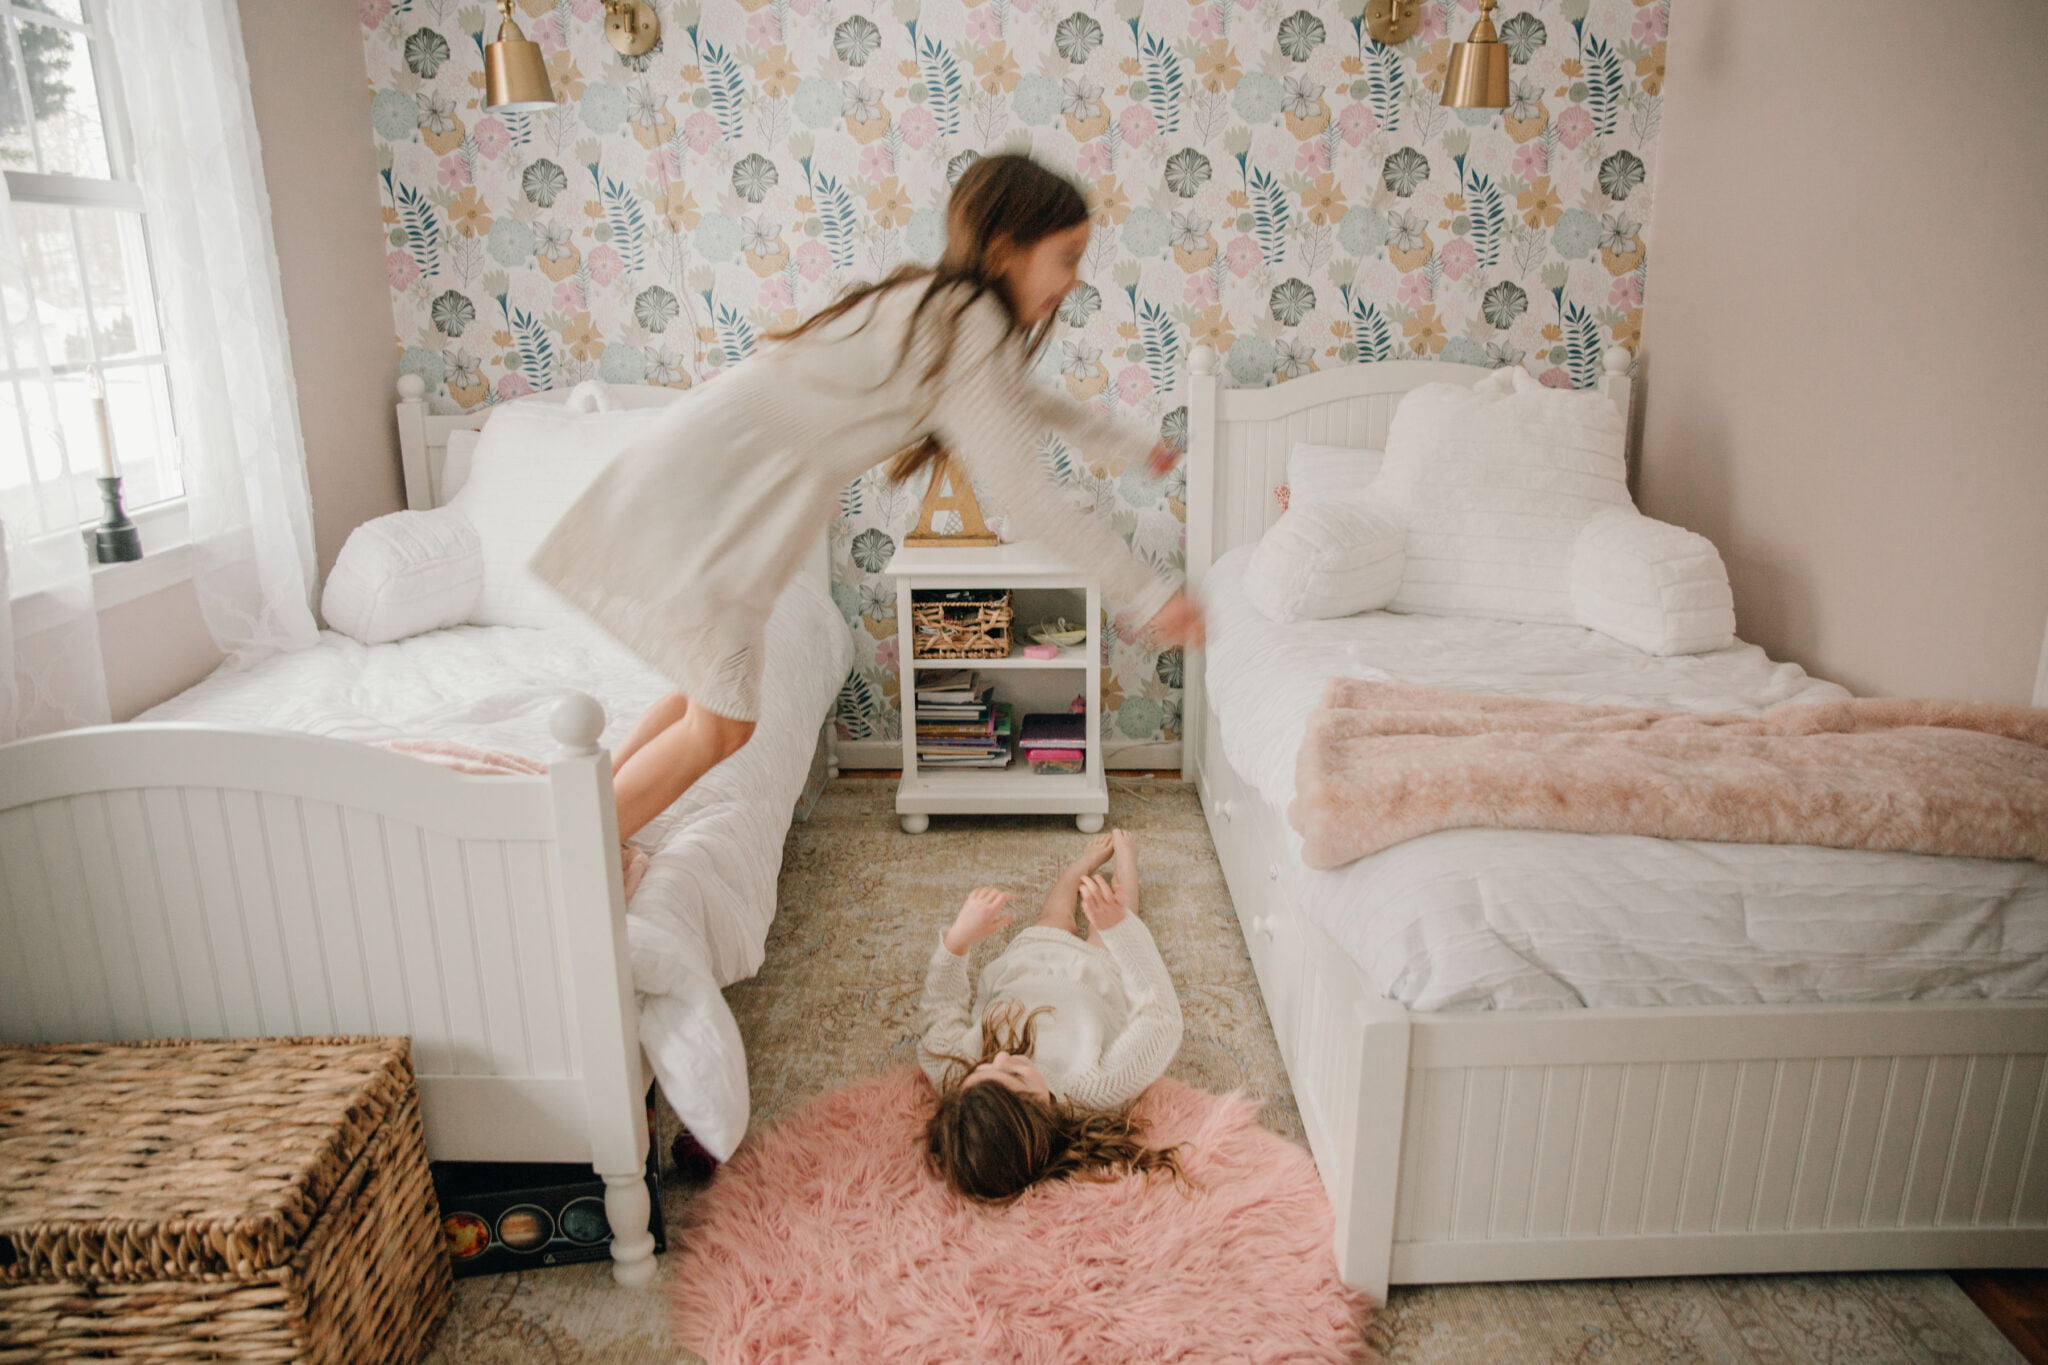 girls jumping on beds in shared bedroom